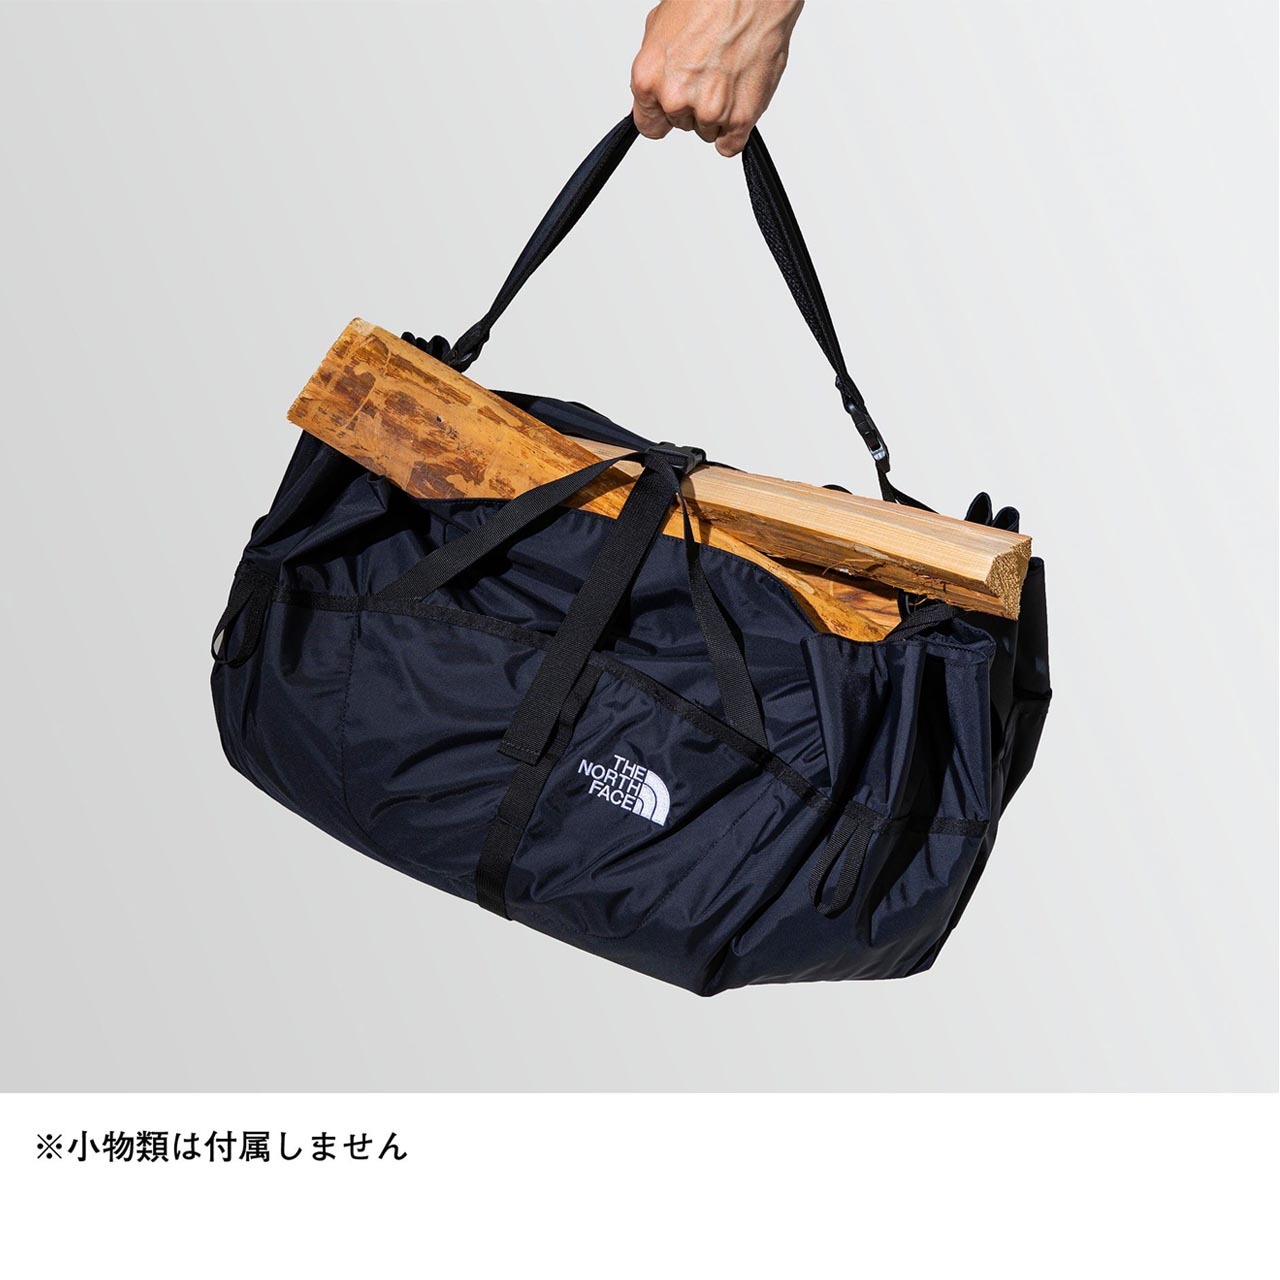 THE NORTH FACE [ザ・ノース・フェイス] Escape Shoulder Pouch [NM82232]_f0051306_07541971.jpg